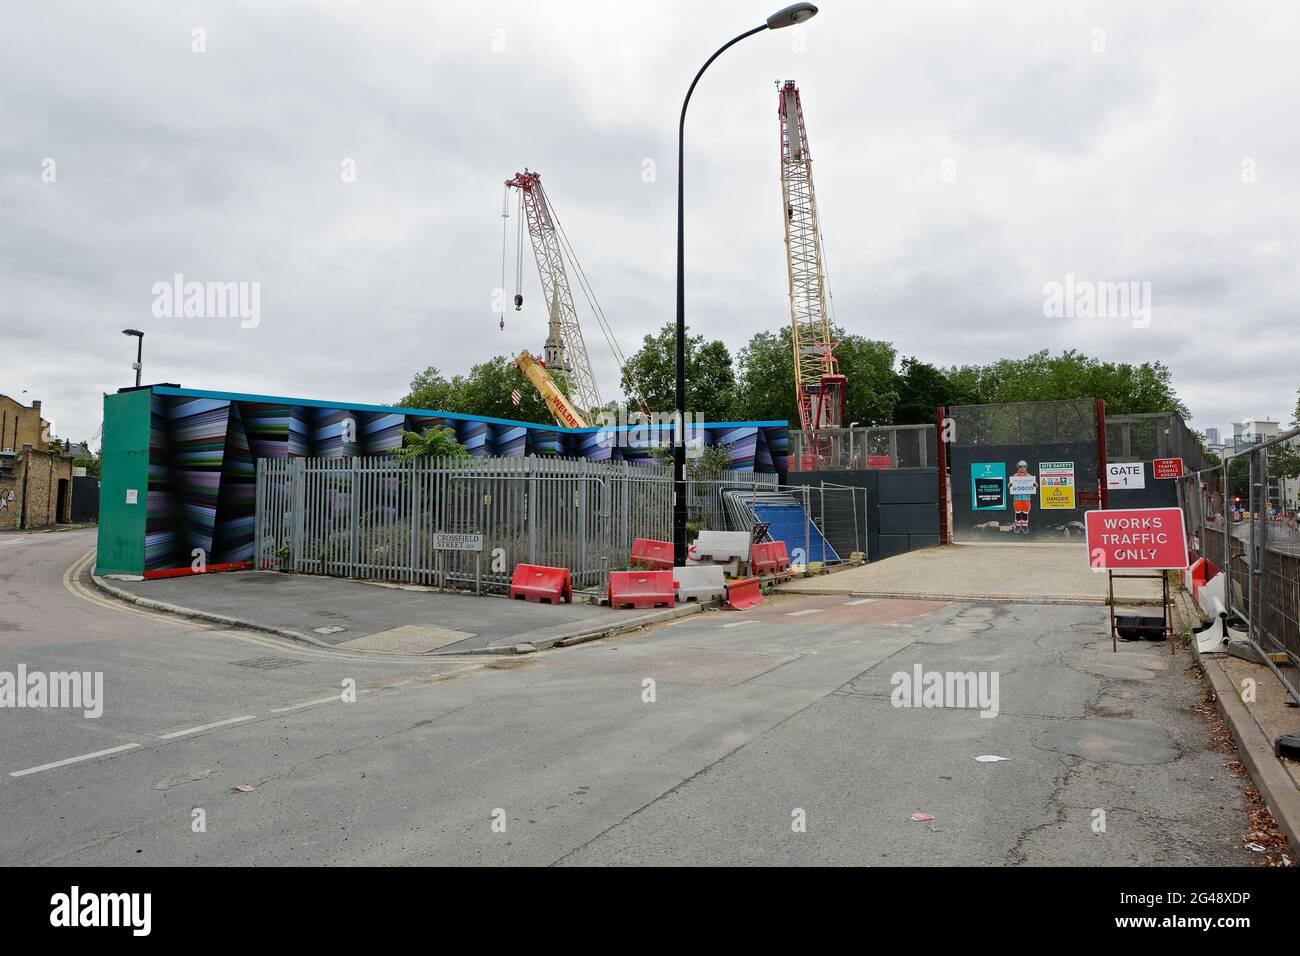 London (UK), June 2021: The Construction of London's new sewage overflow waste management system which will replace the extant 150 year old system. Stock Photo